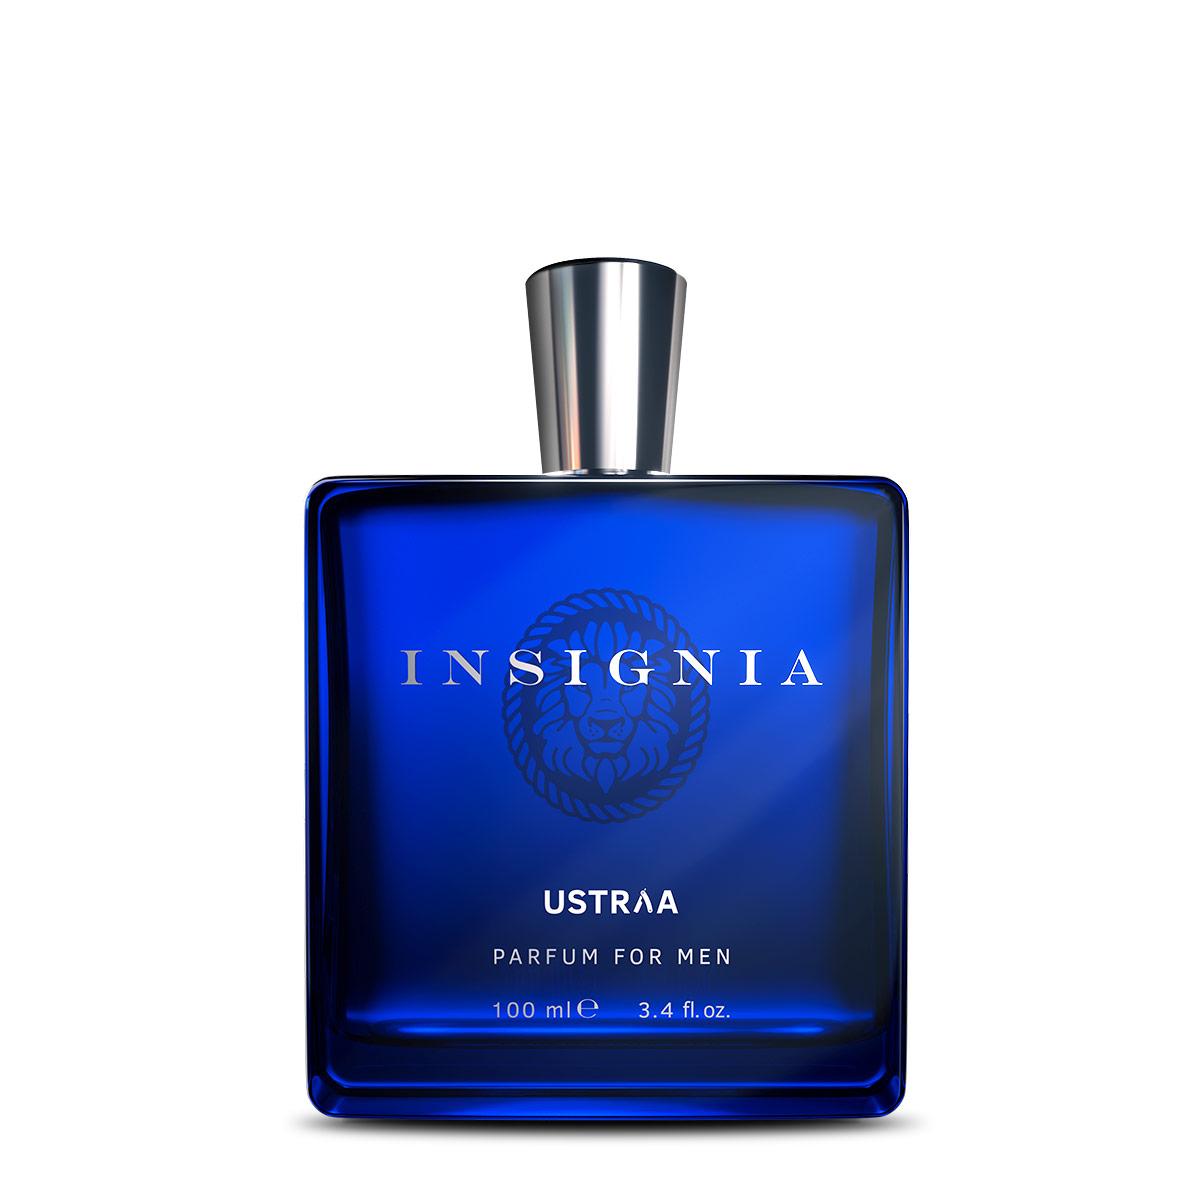 Ustraa Insignia Perfume for Men - 100 ml - A high end perfume with a crisp and woody trail 